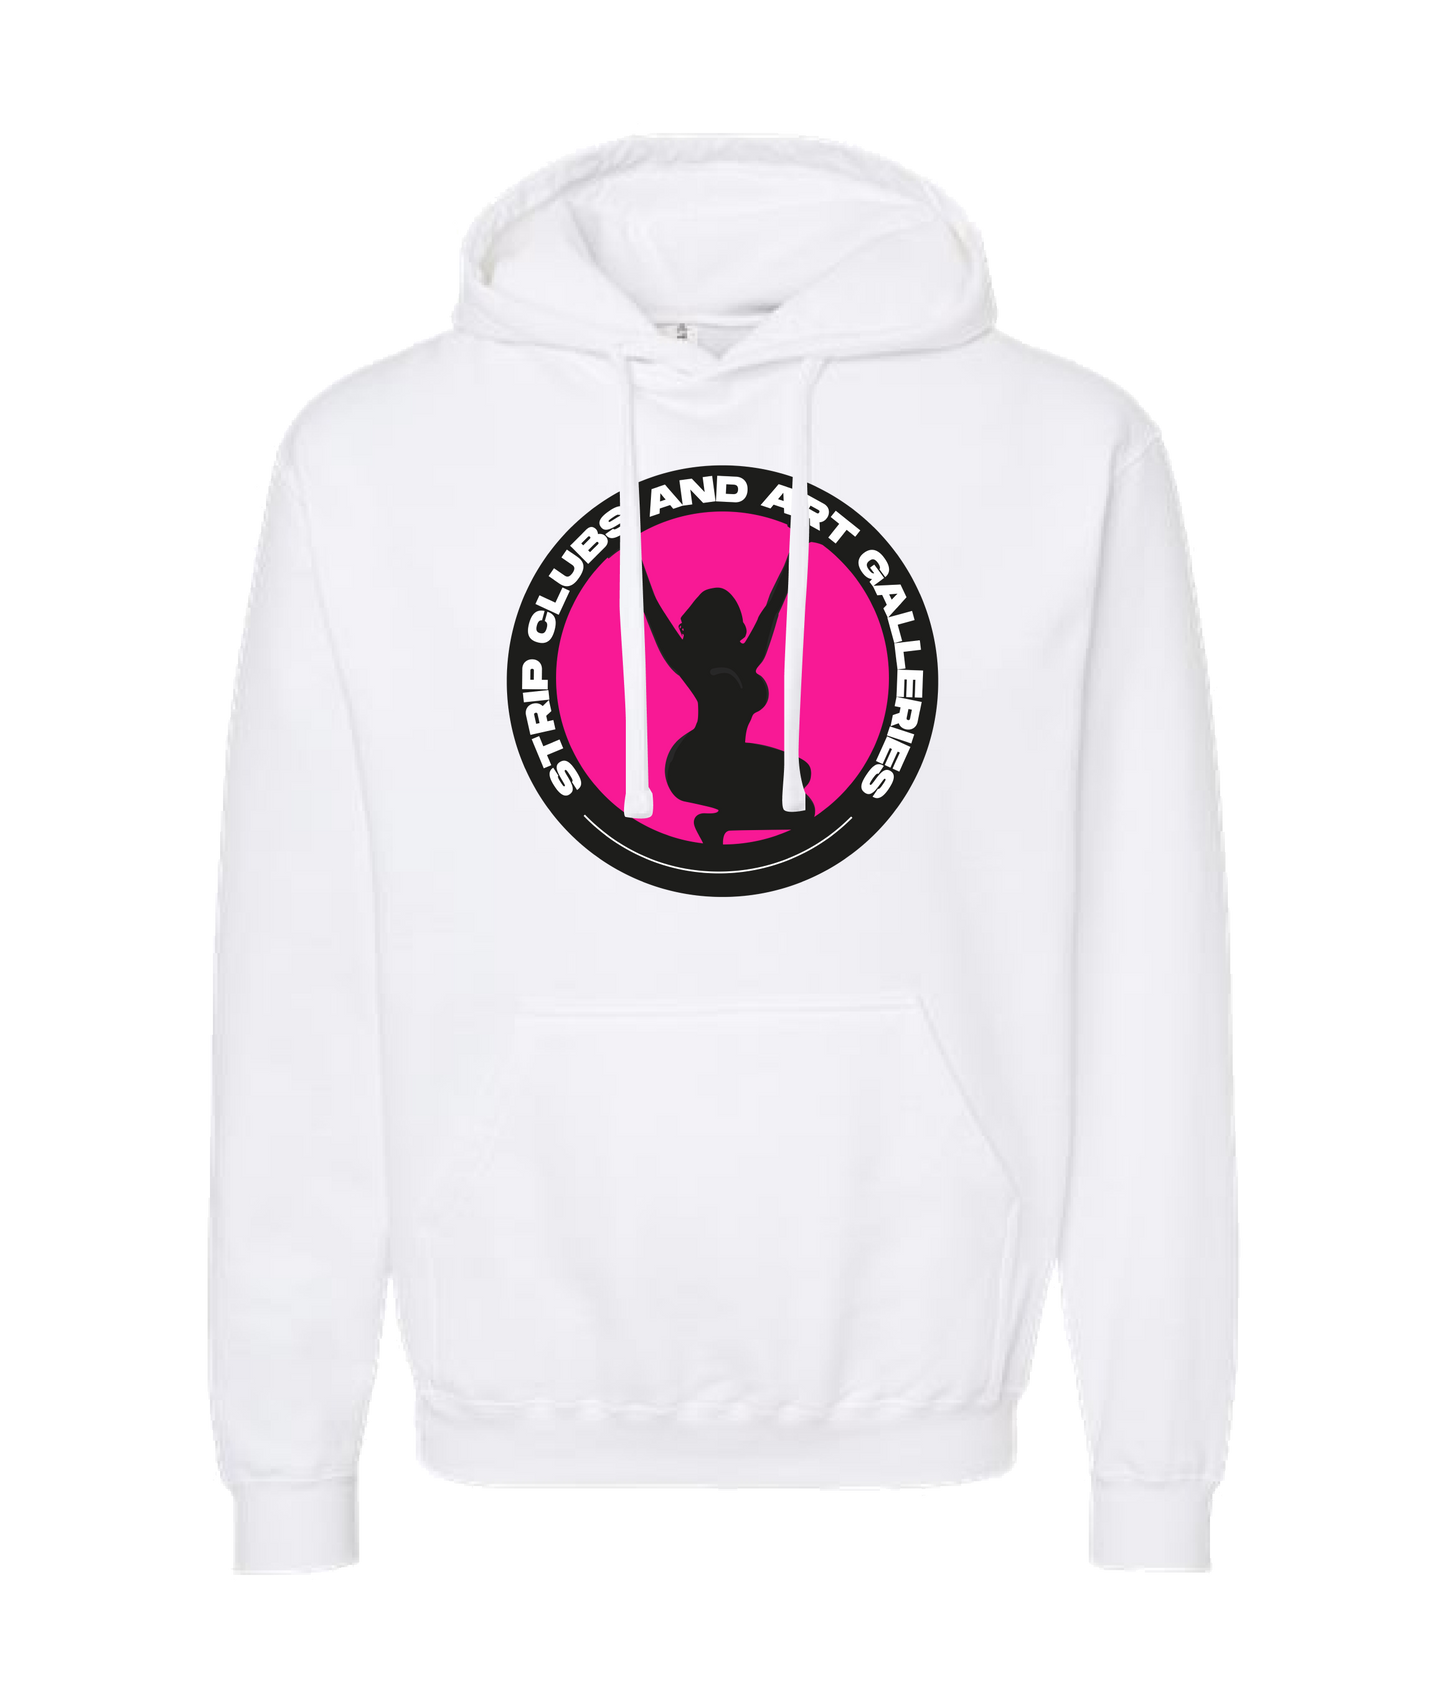 StripClubs and Art Galleries - Patch Tee - White Hoodie